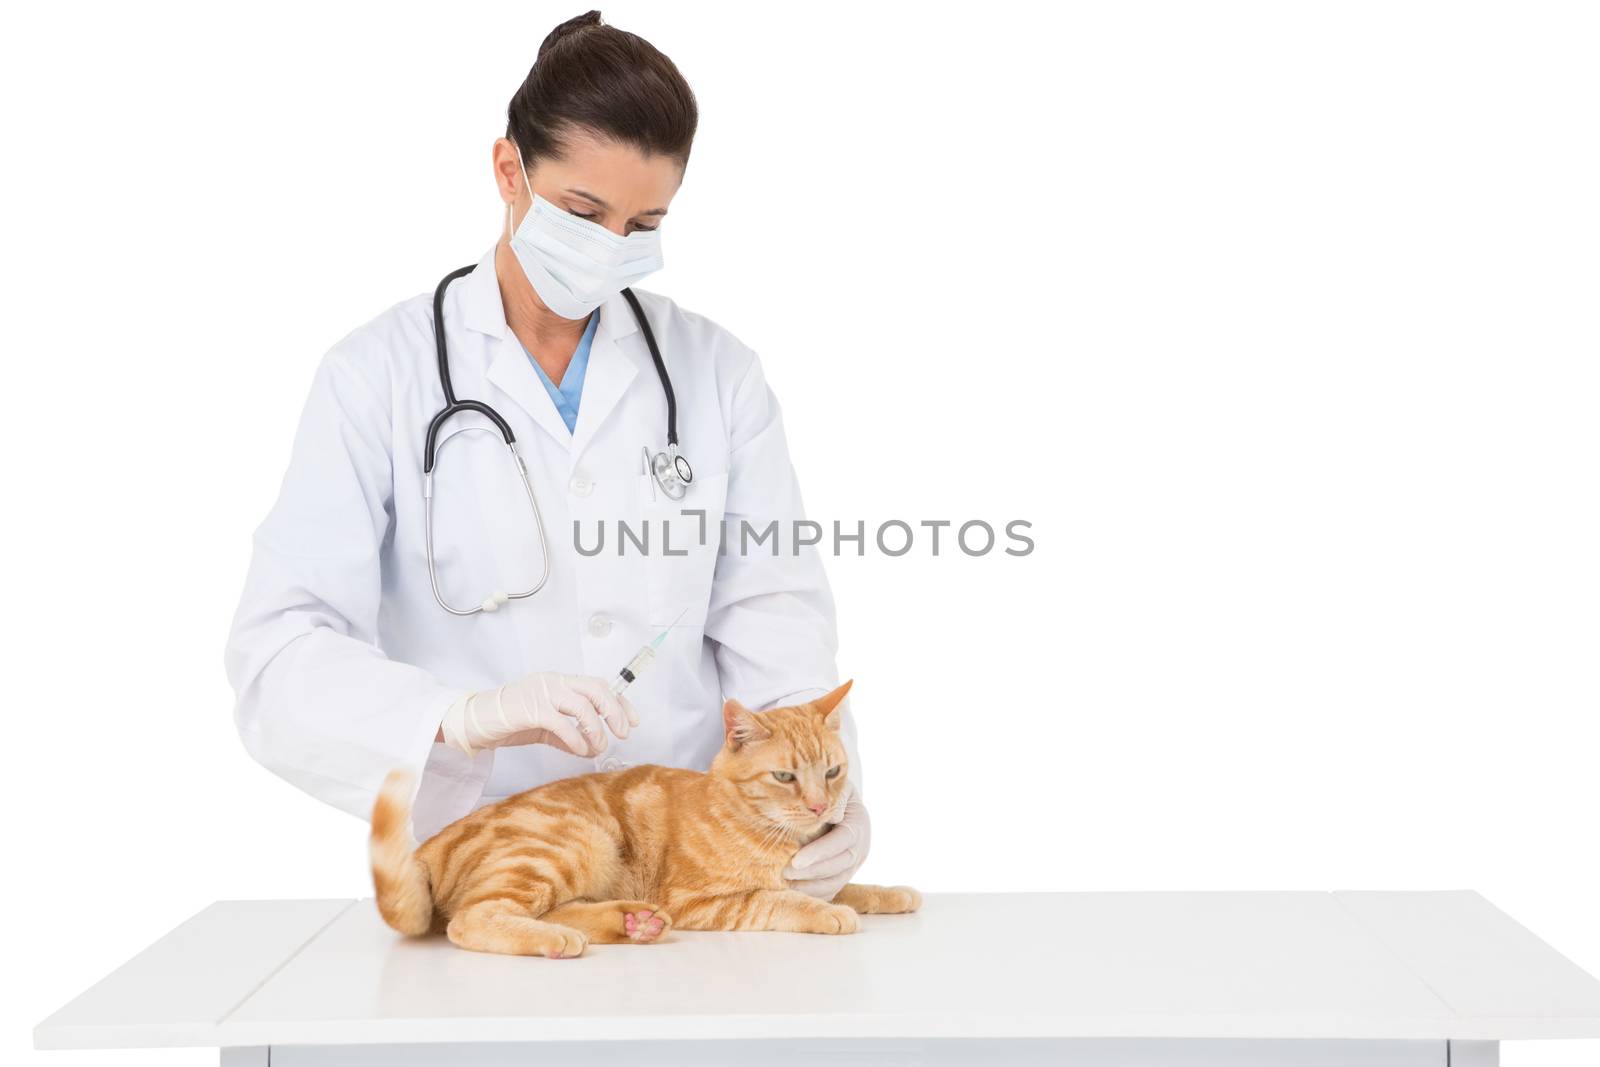 Veterinarian with surgical mask examining a cat on white background 